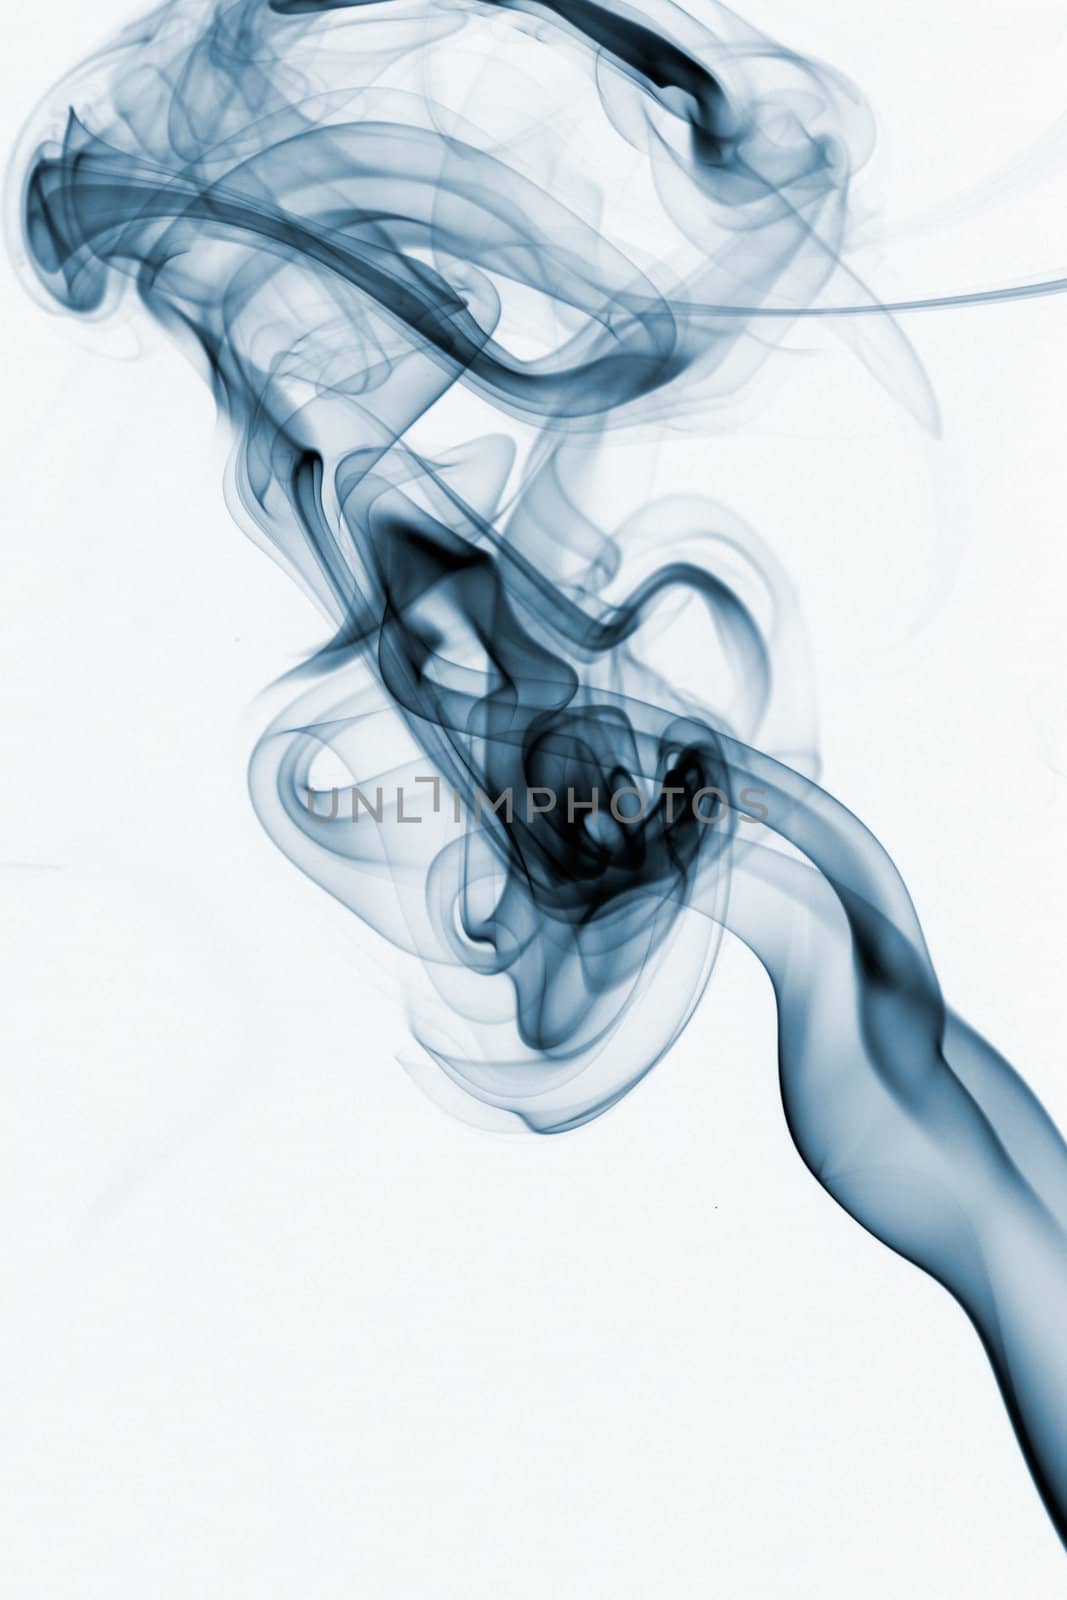 Abstract smoke curling and creating beautiful shapes